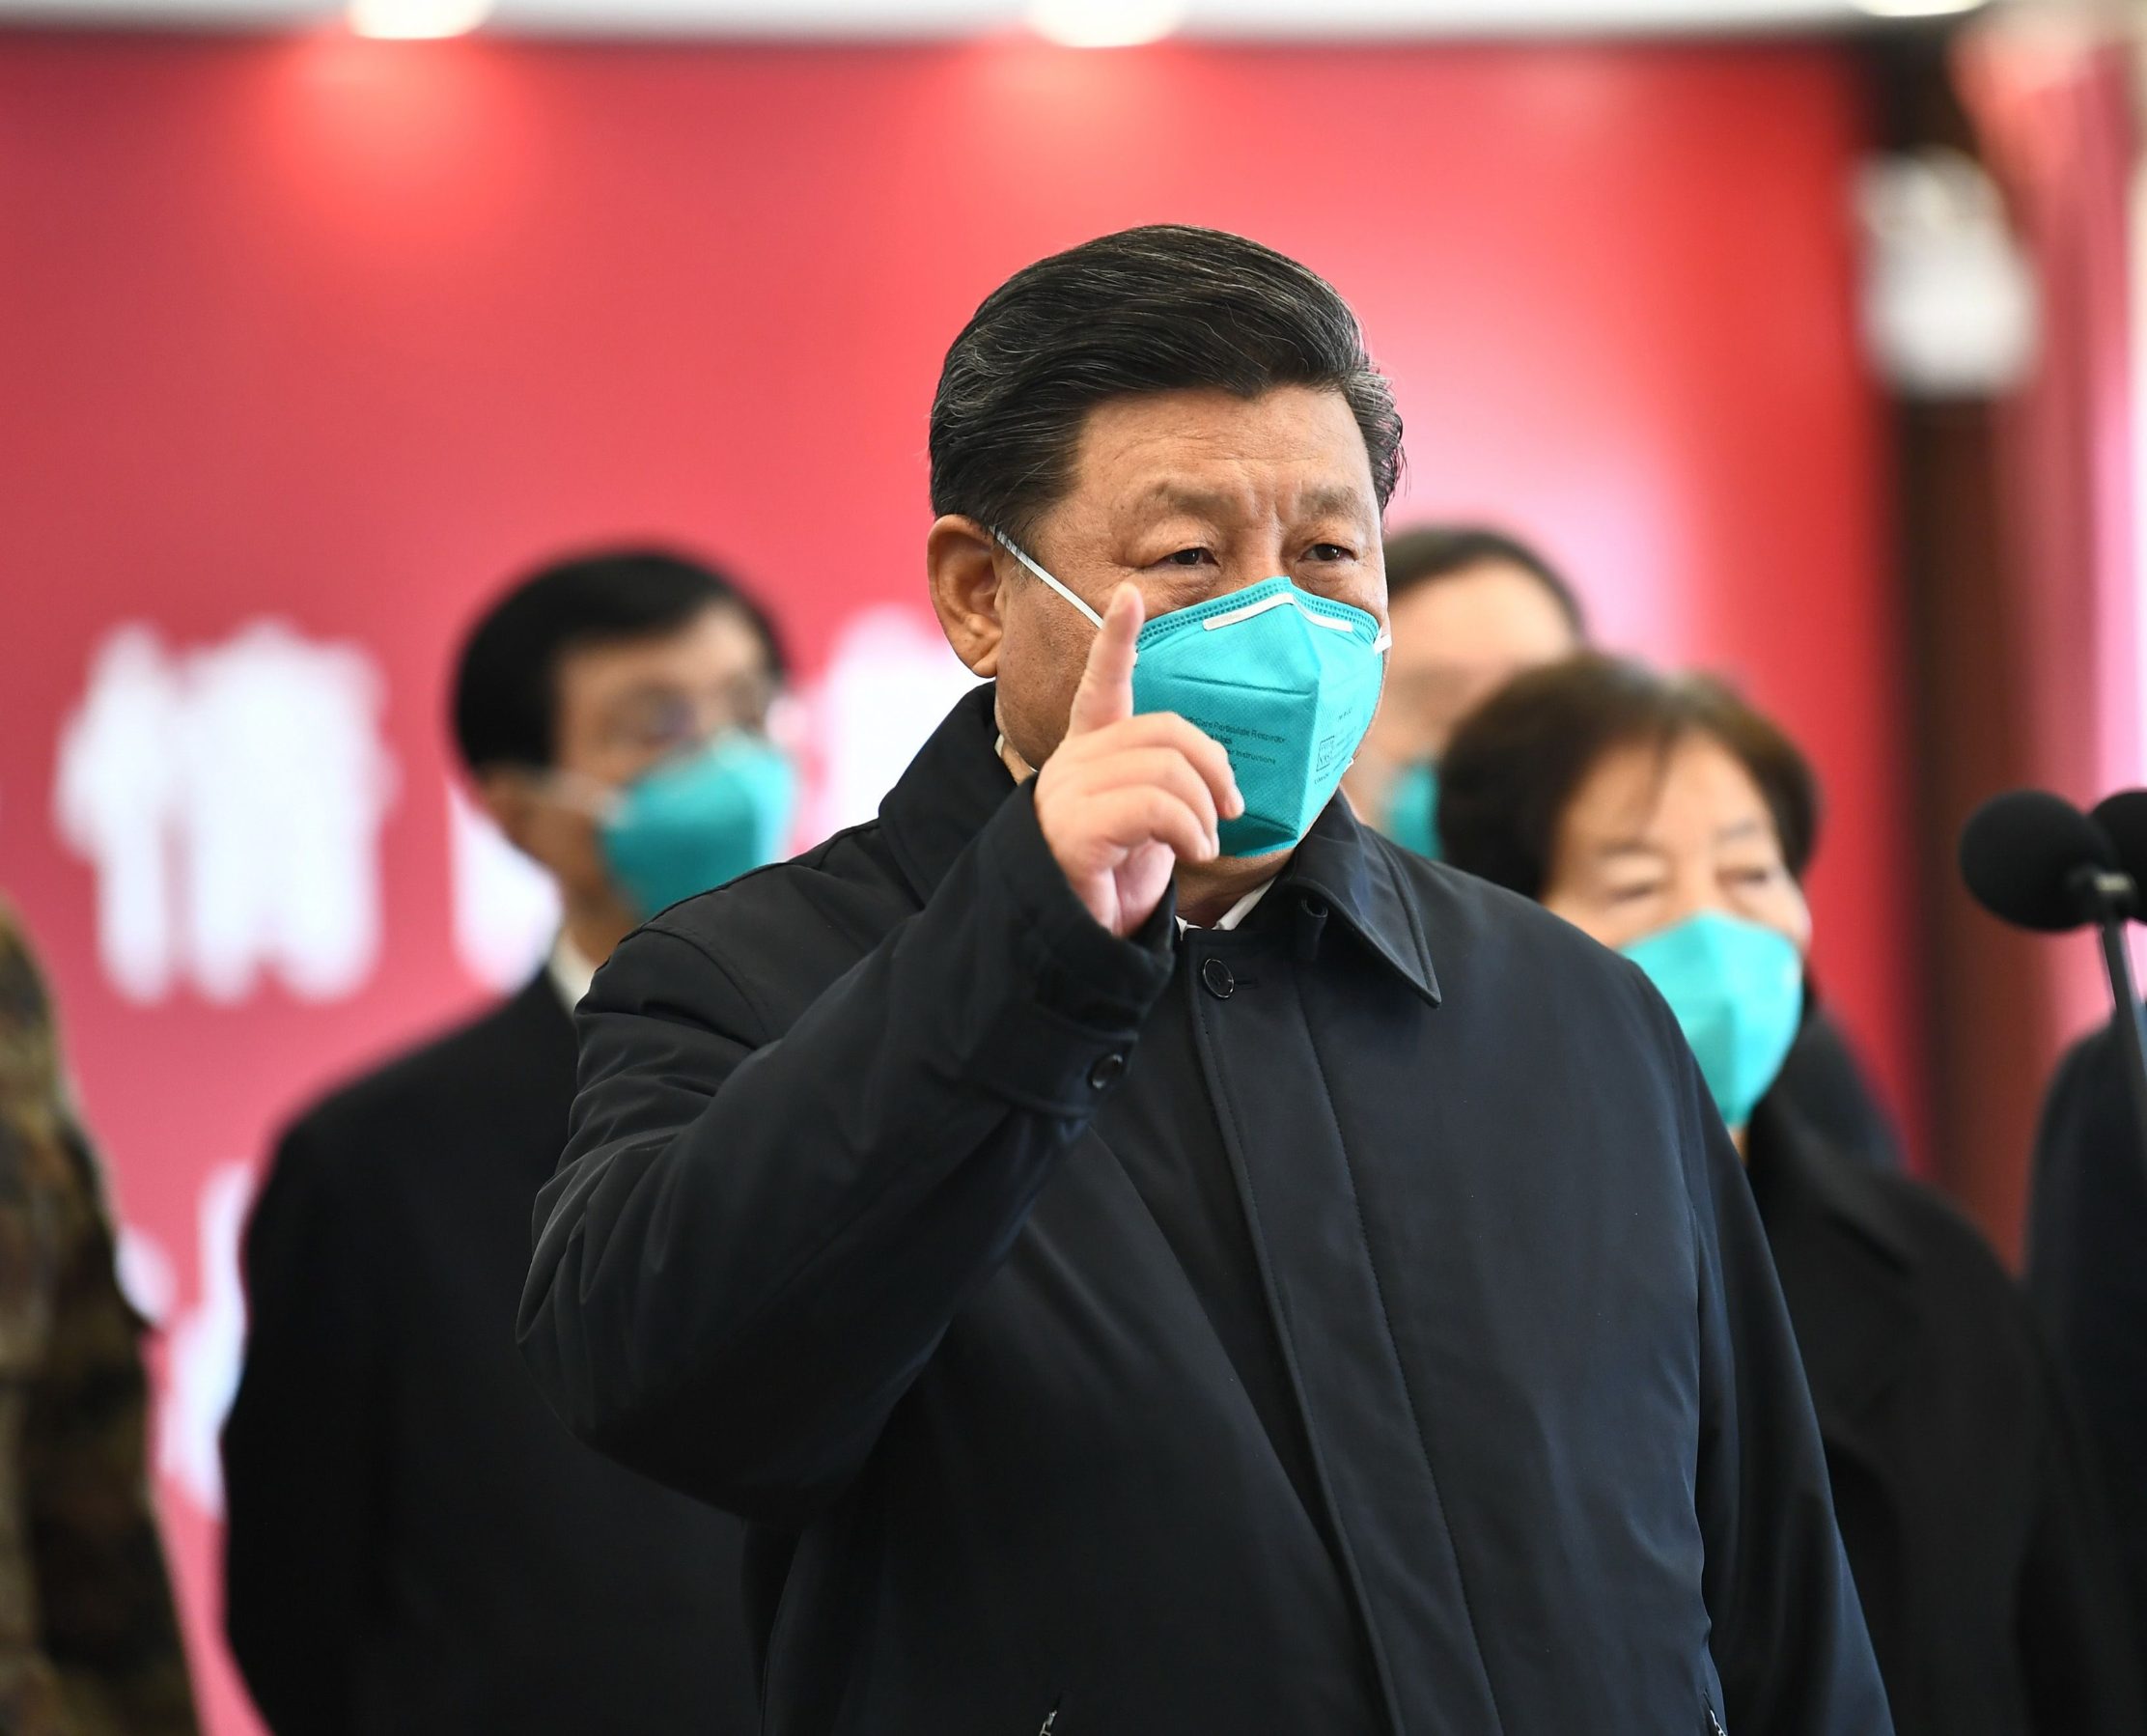 This photo released on March 10, 2020 by China's Xinhua News Agency shows Chinese President Xi Jinping wearing a mask as he GESTURES to a coronavirus patient and medical staff via a video link at the Huoshenshan hospital in Wuhan, in China's central Hubei province on March 10, 2020. (Photo by Xie Huanchi / XINHUA / AFP) / China OUT - Hong Kong OUT - Japan OUT - Germany OUT - United States OUT - United Kingdom OUT / -----EDITORS NOTE---- RESTRICTED TO EDITORIAL USE - ONE TIME USE - MANDATORY CREDIT 